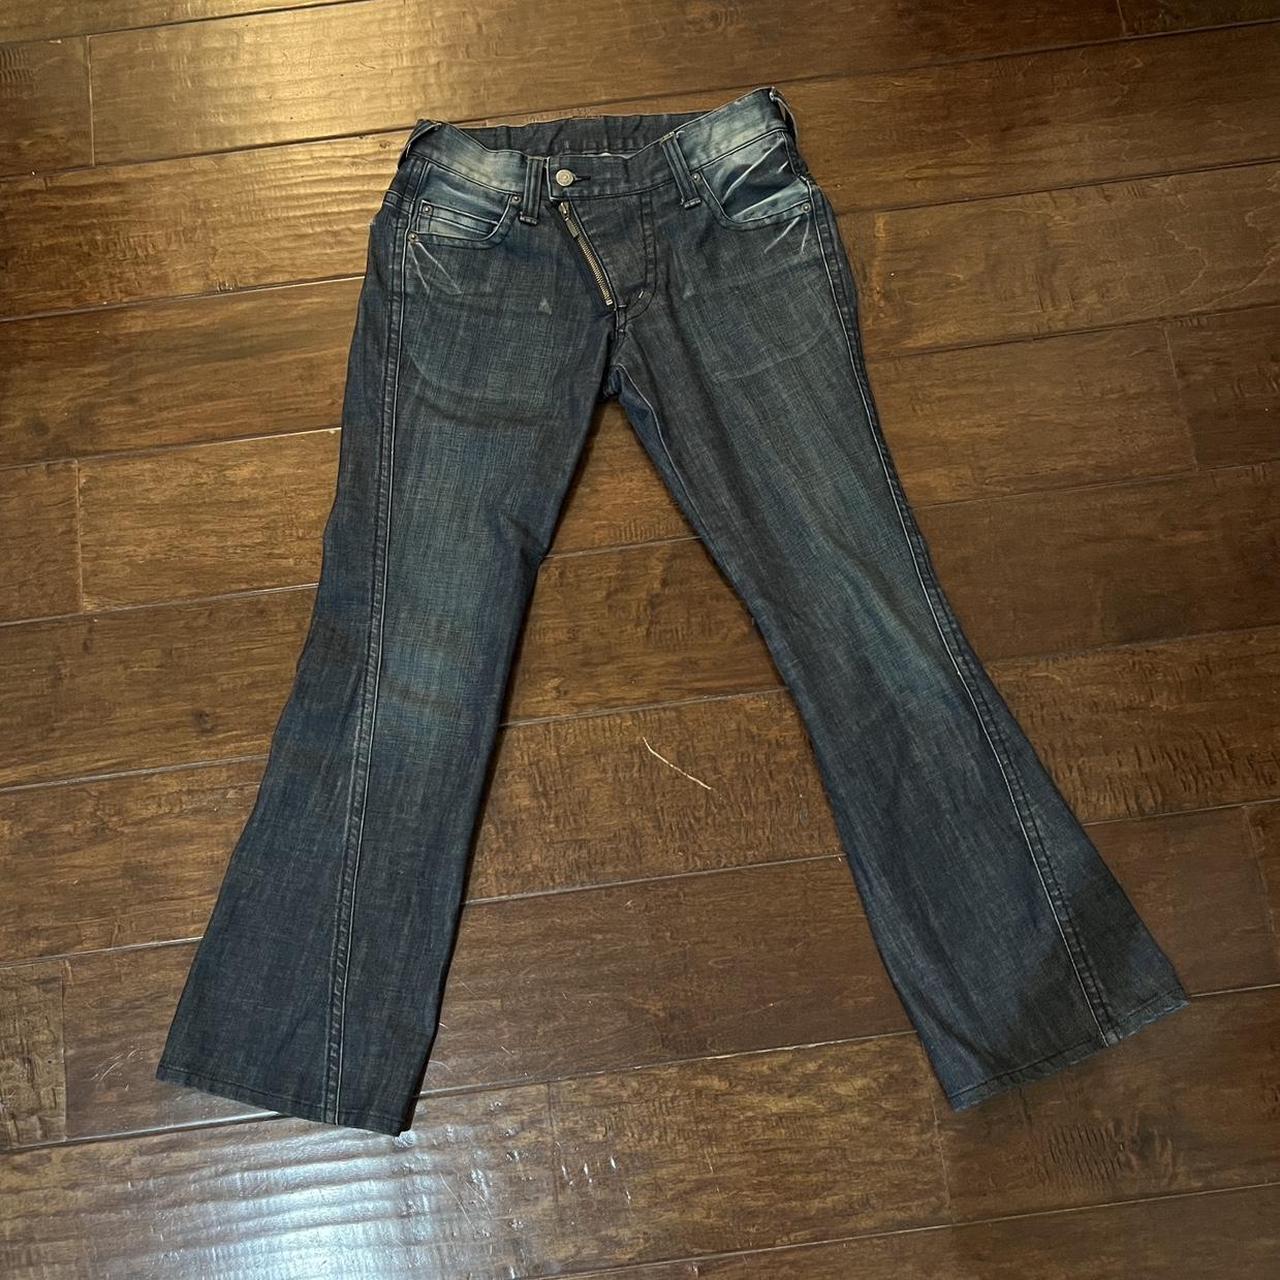 Tornado mart flared jeans 32x32 with asymmetrical...